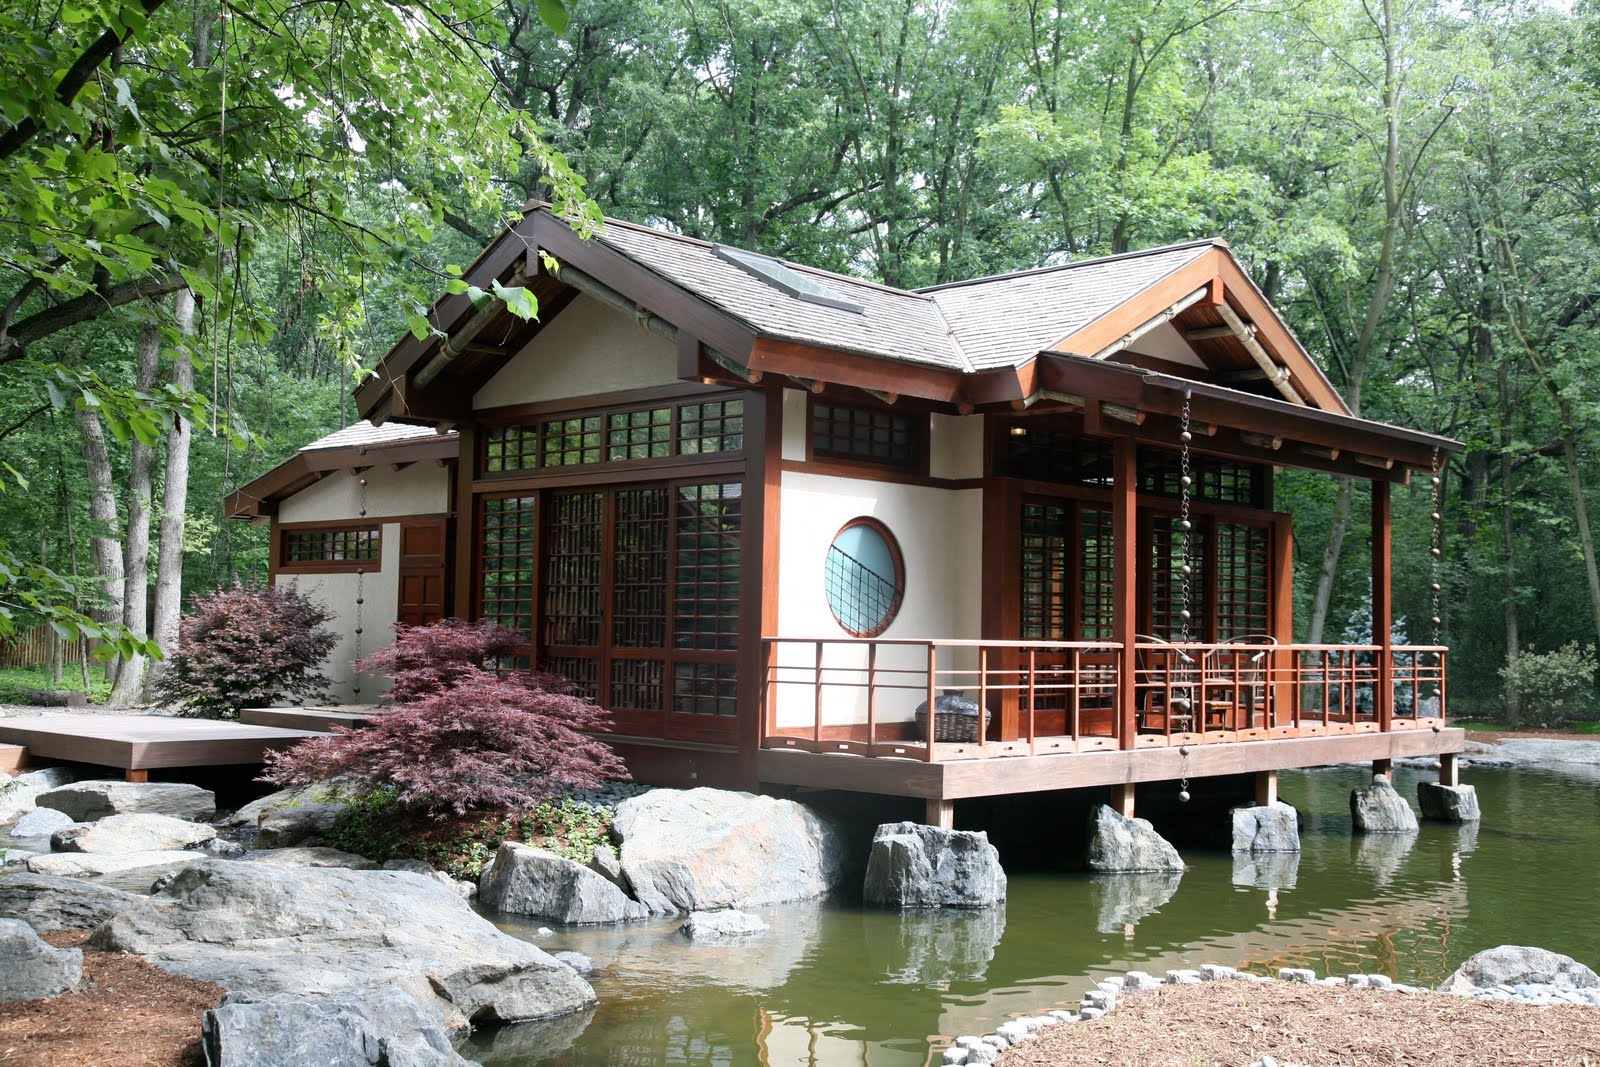 Small house with traditional Asian design